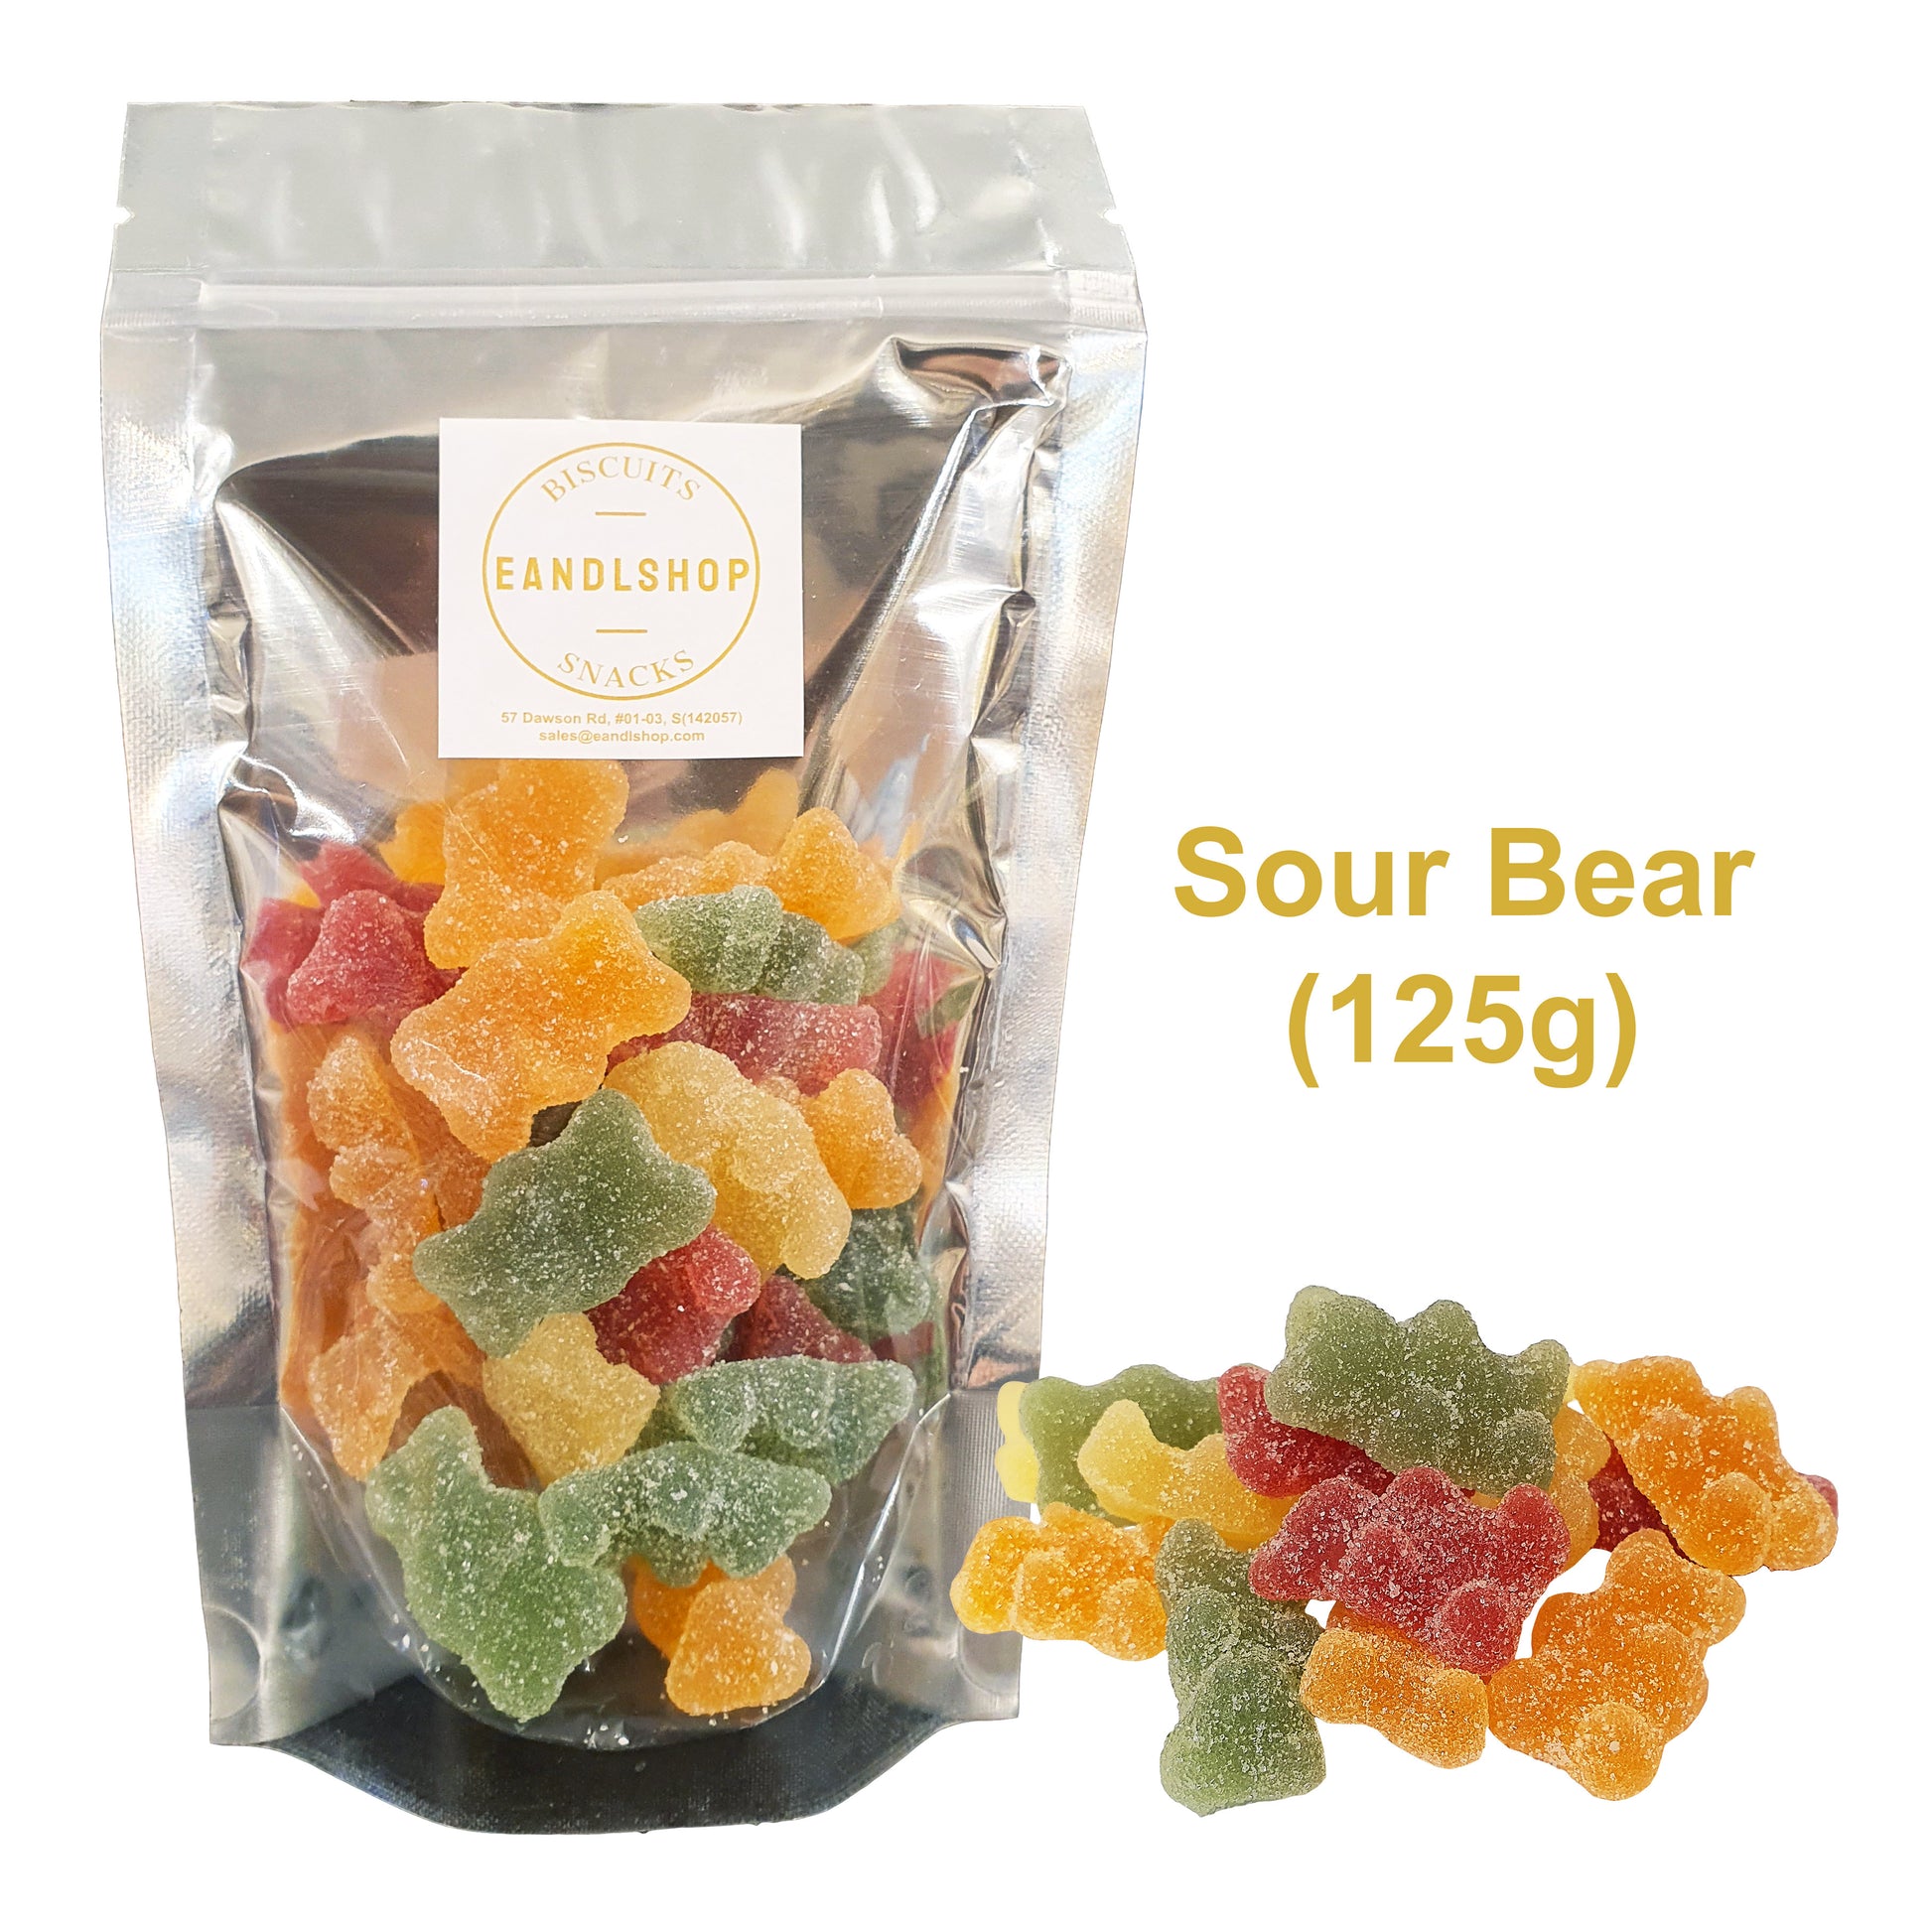 Bebeto sour bear. Old-school biscuits, modern snacks (chips, crackers), cakes, gummies, plums, dried fruits, nuts, herbal tea – available at www.EANDLSHOP.com